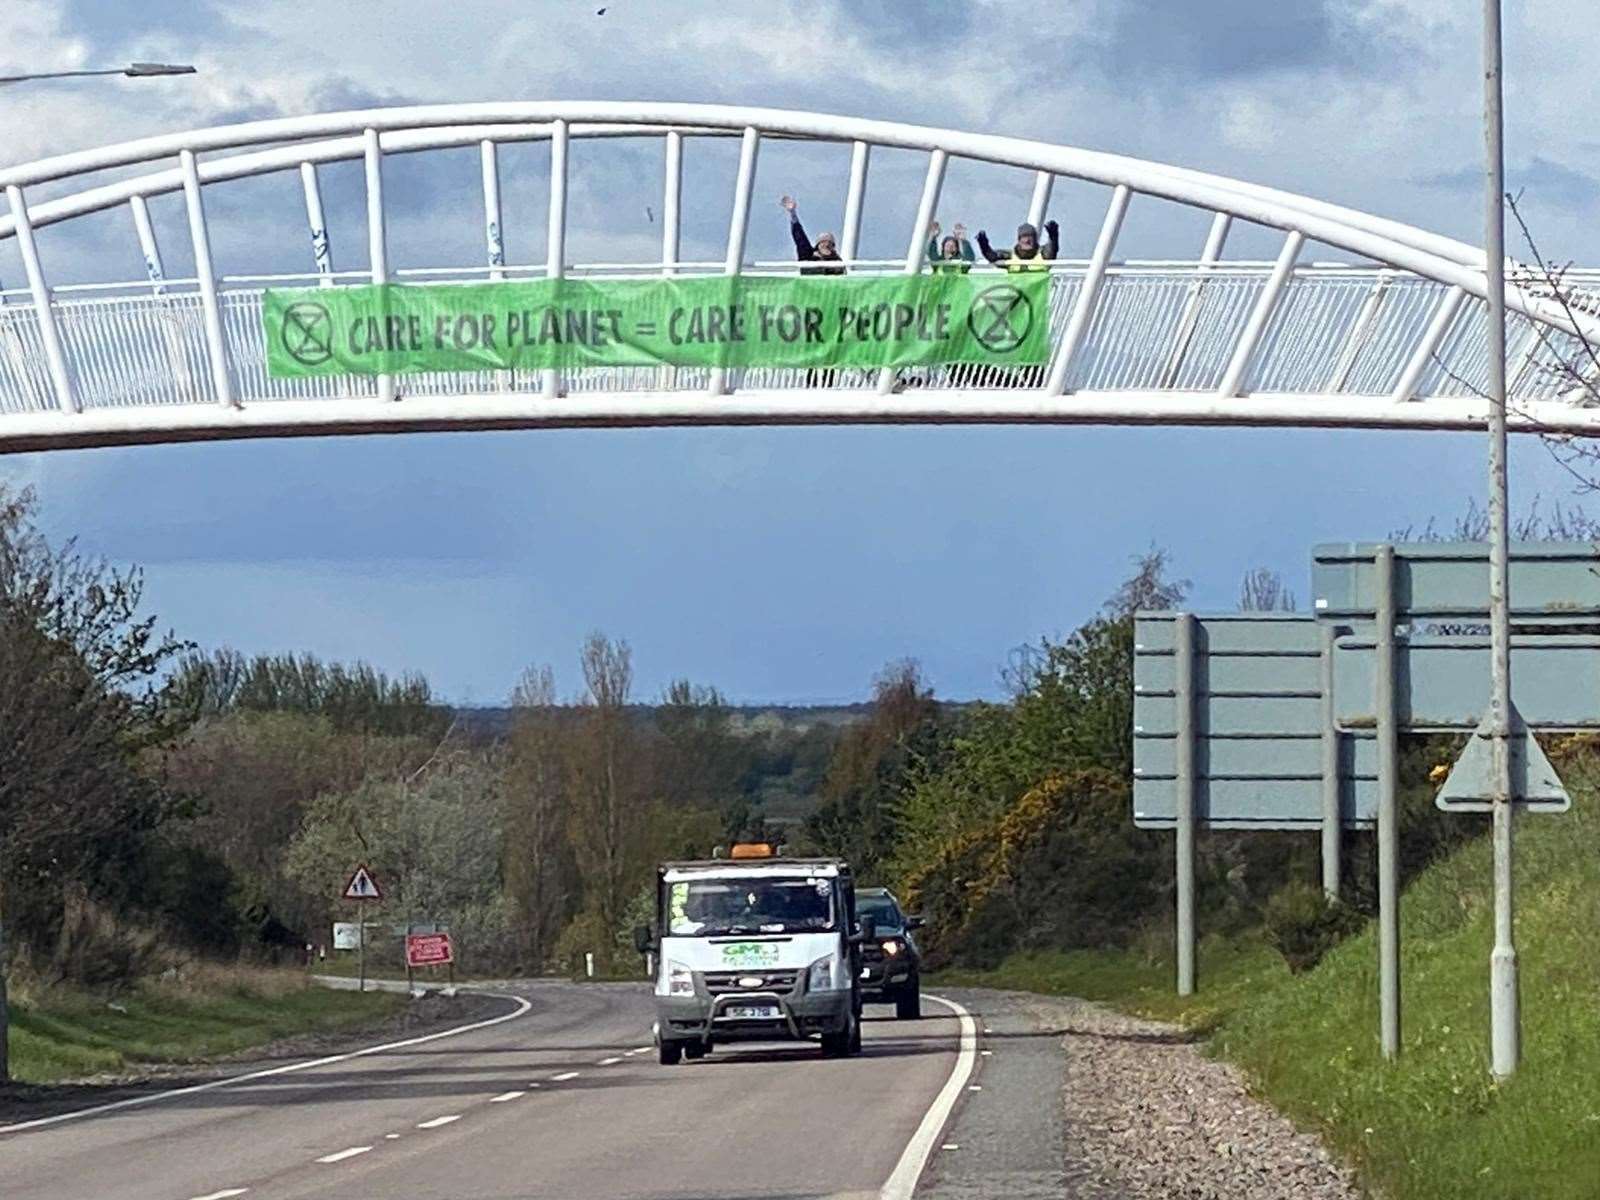 Environmental campaigners dropping their banner to raise awareness of climate change.